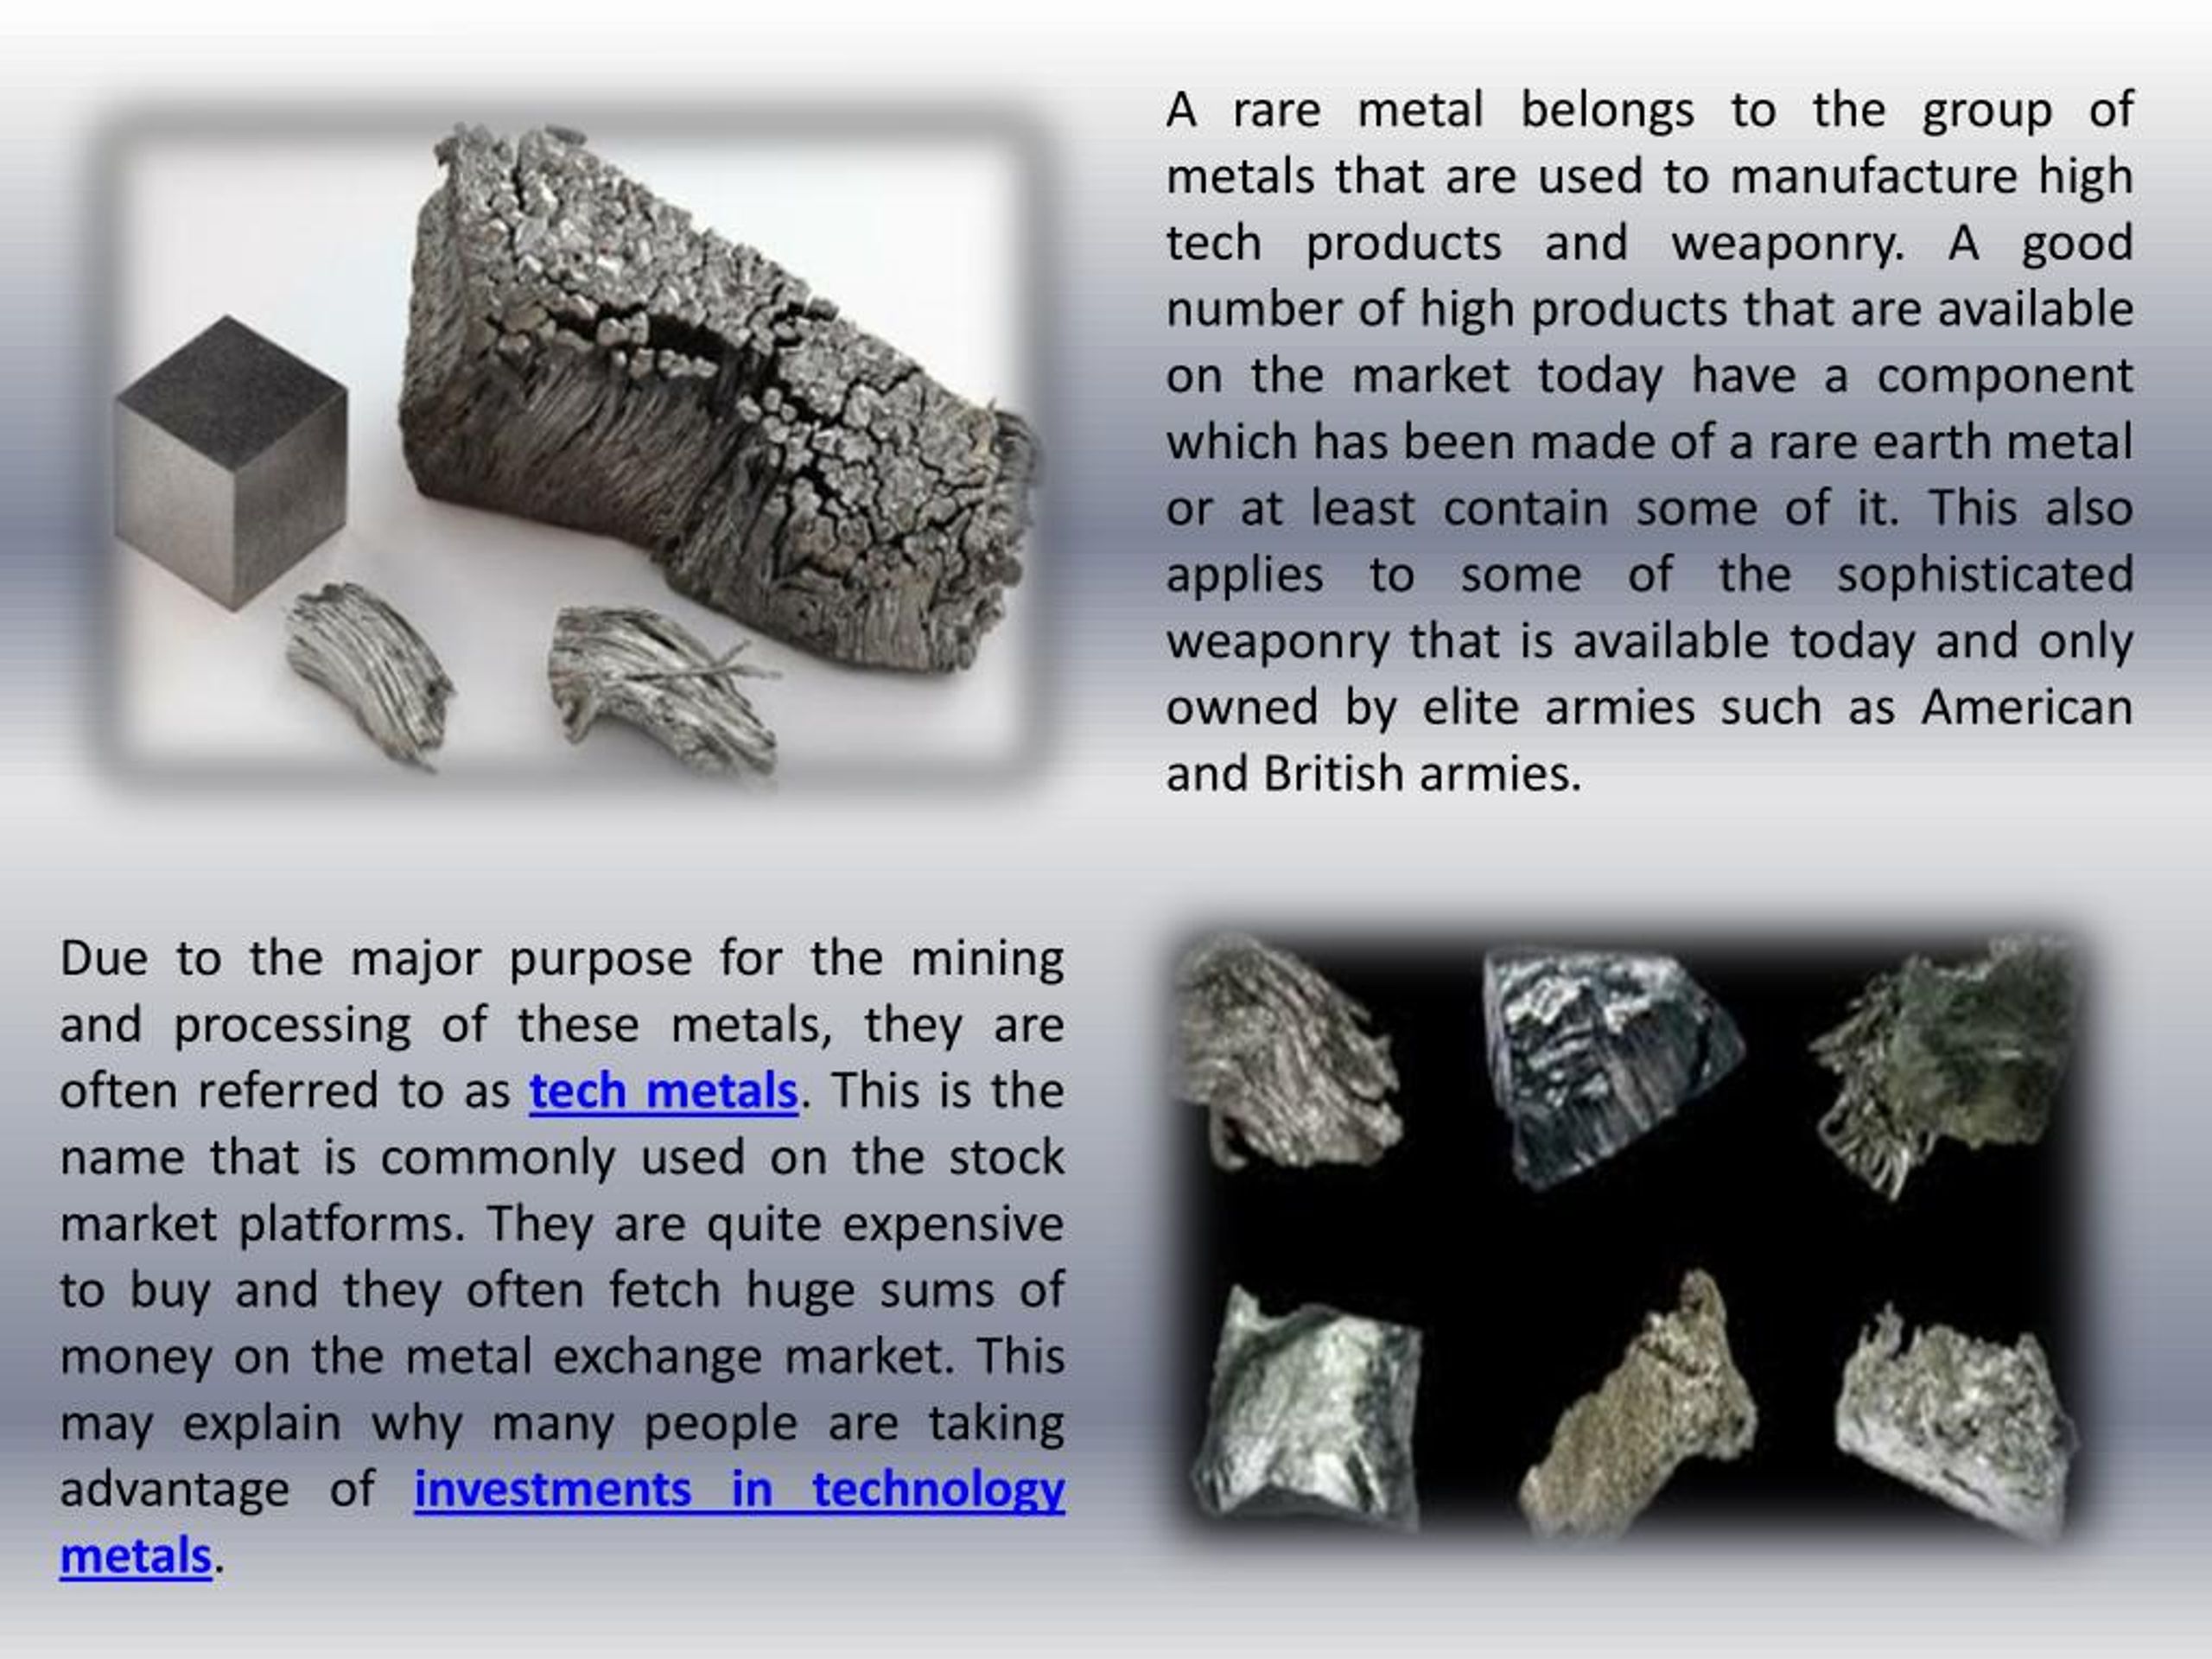 PPT - What Are Rare Earth Metals? PowerPoint Presentation, free ...